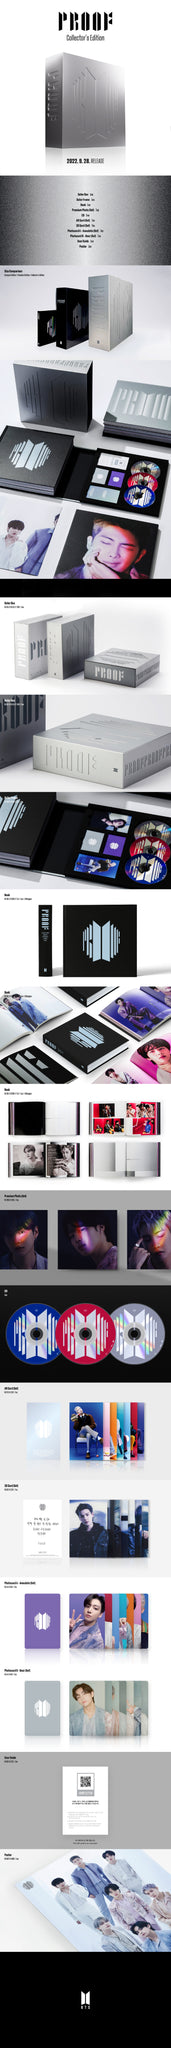 BTS - Proof (Collector’s Edition) [LIMITED]